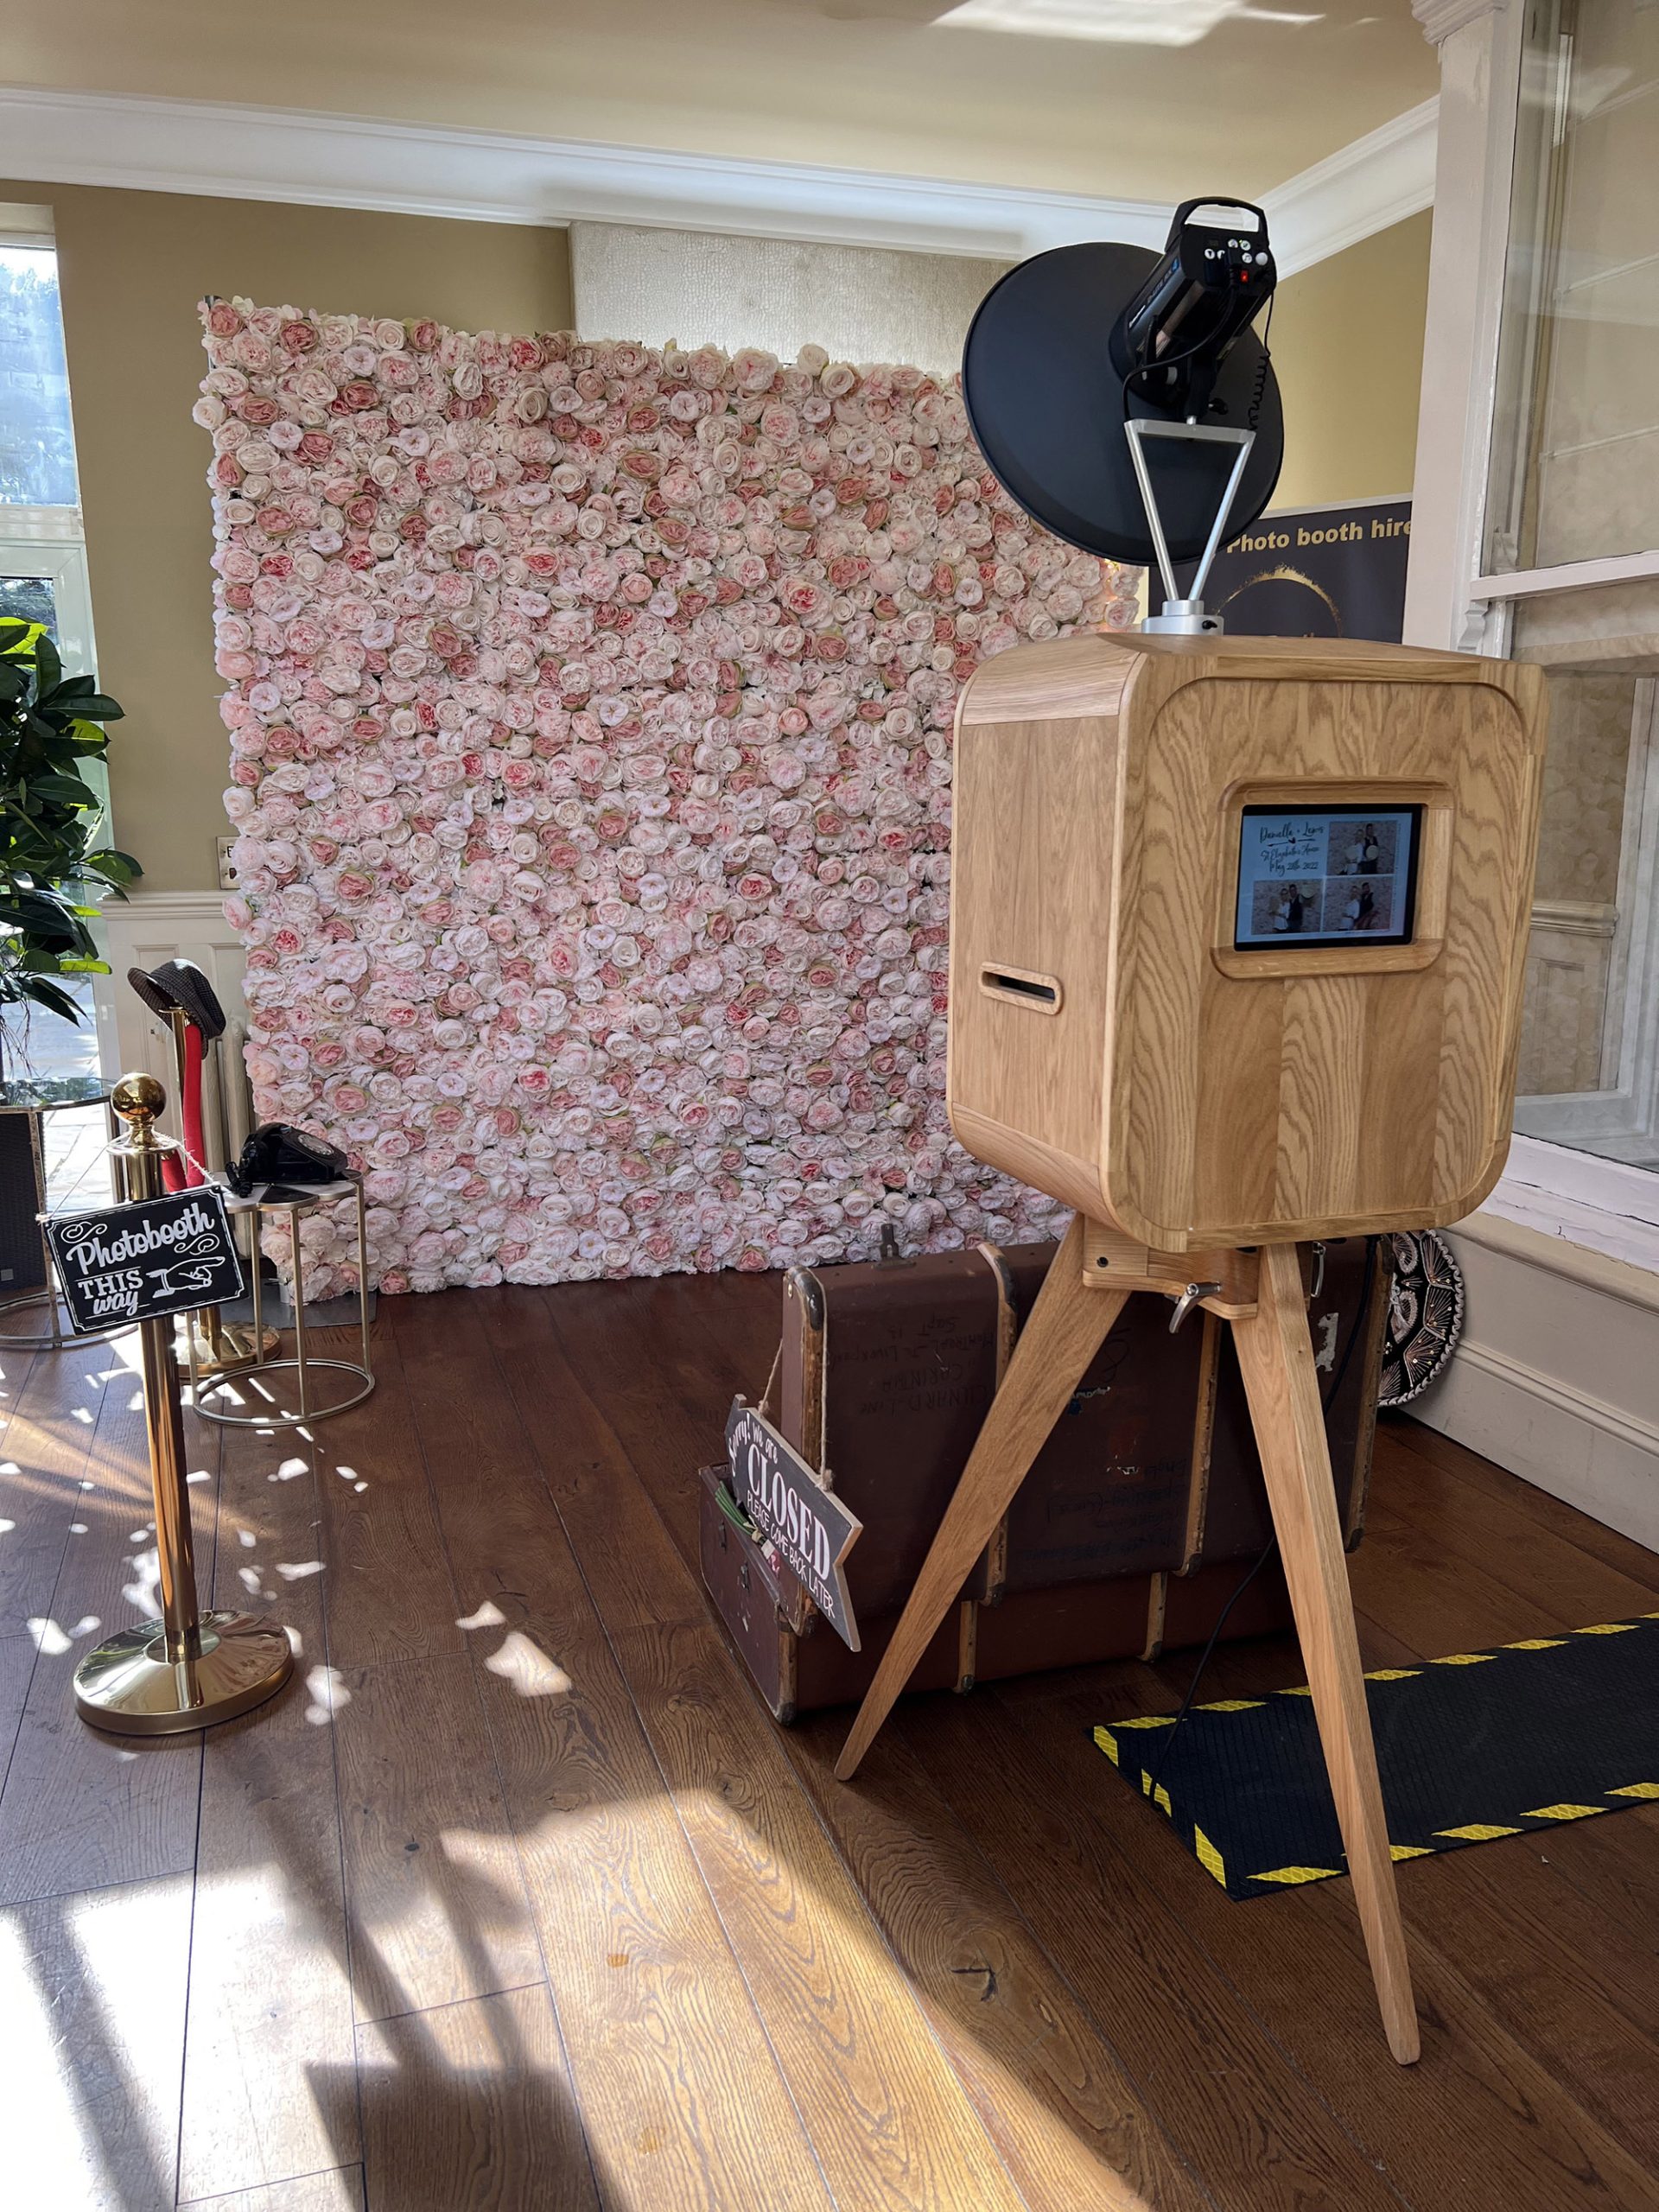 Posh Booth Photo Booth hire in St Elizabeth's House